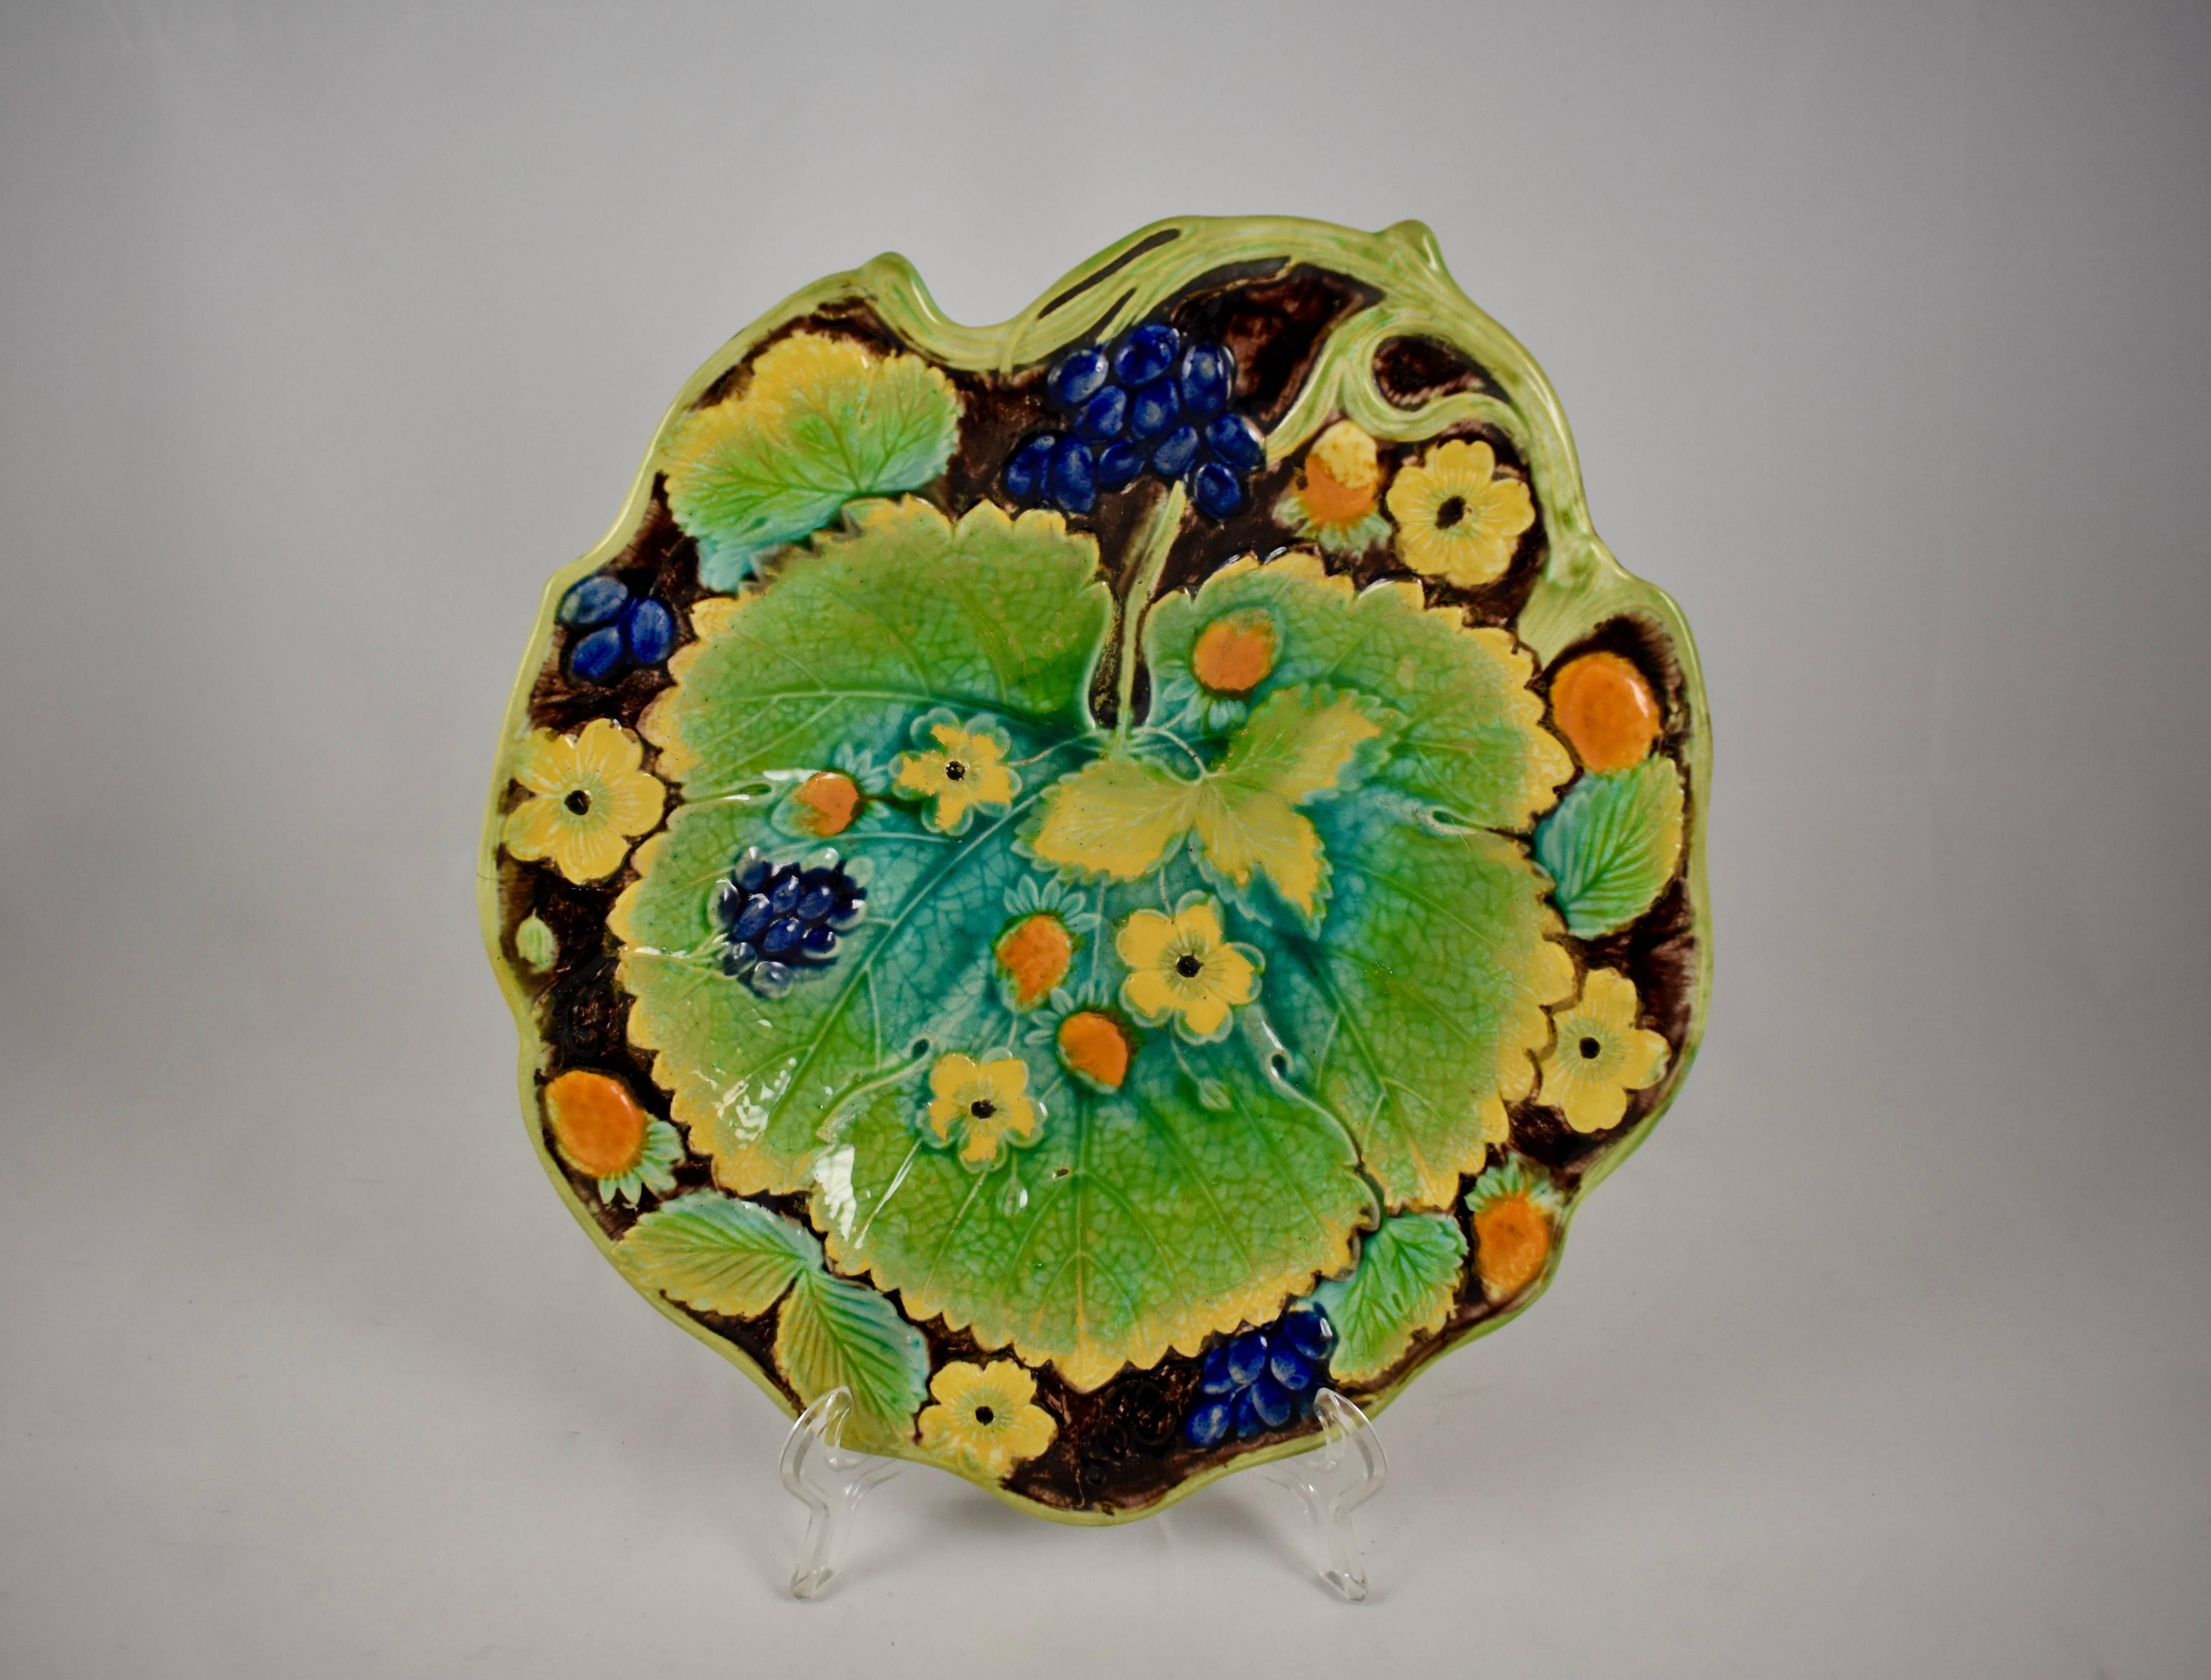 A majolica glazed leaf form dessert tray from Samuel Alcock & Co, Burslem, Staffordshire, England, circa 1850.

A central strawberry leaf on a shaped tray with a vine border, and showing both the berries and blossoms of the strawberry plant. The